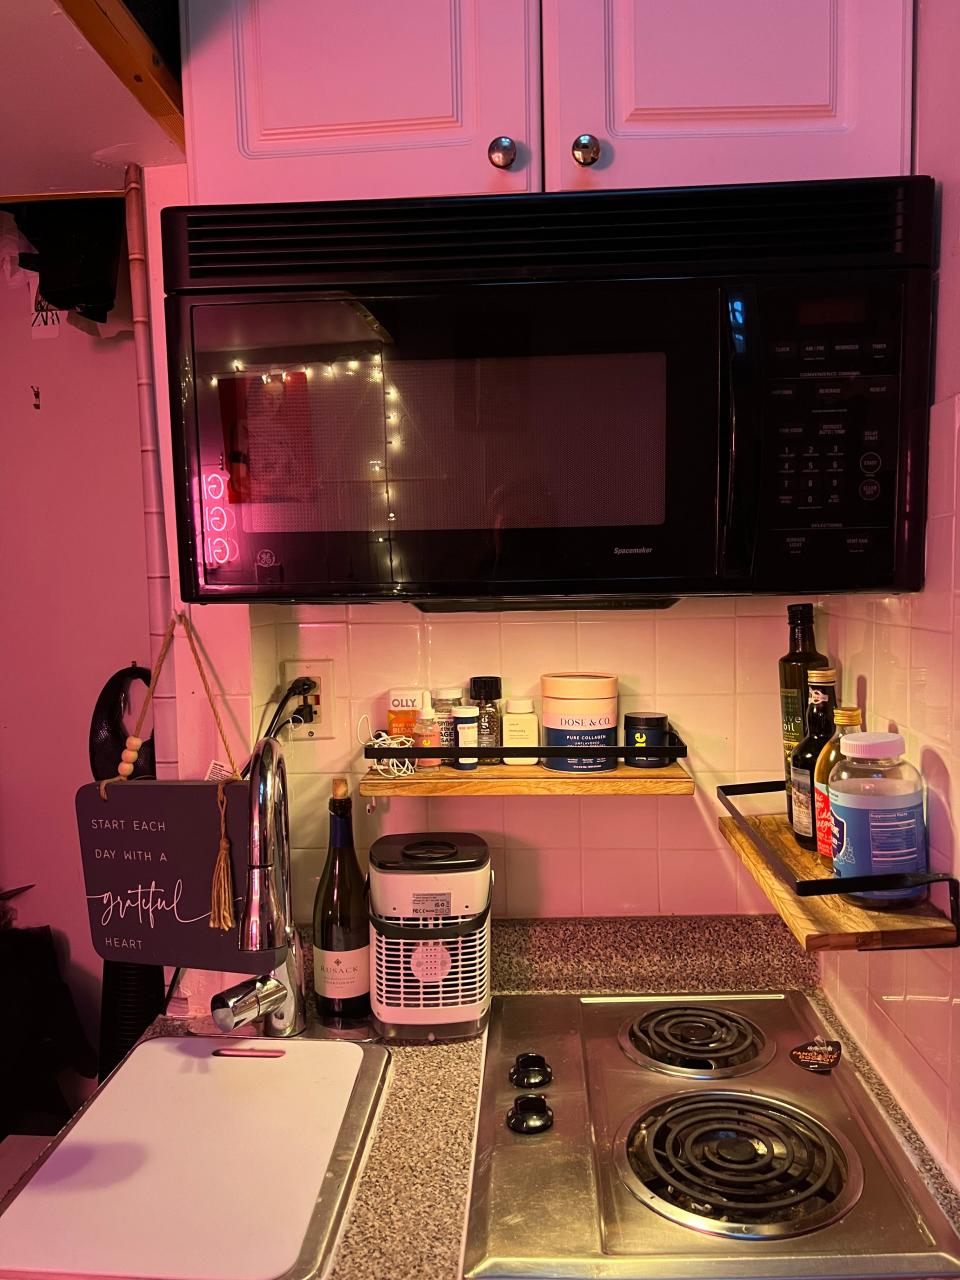 The kitchen of Alaina Randazzo's $650/month apartment, showing a microwave and two-burner stovetop